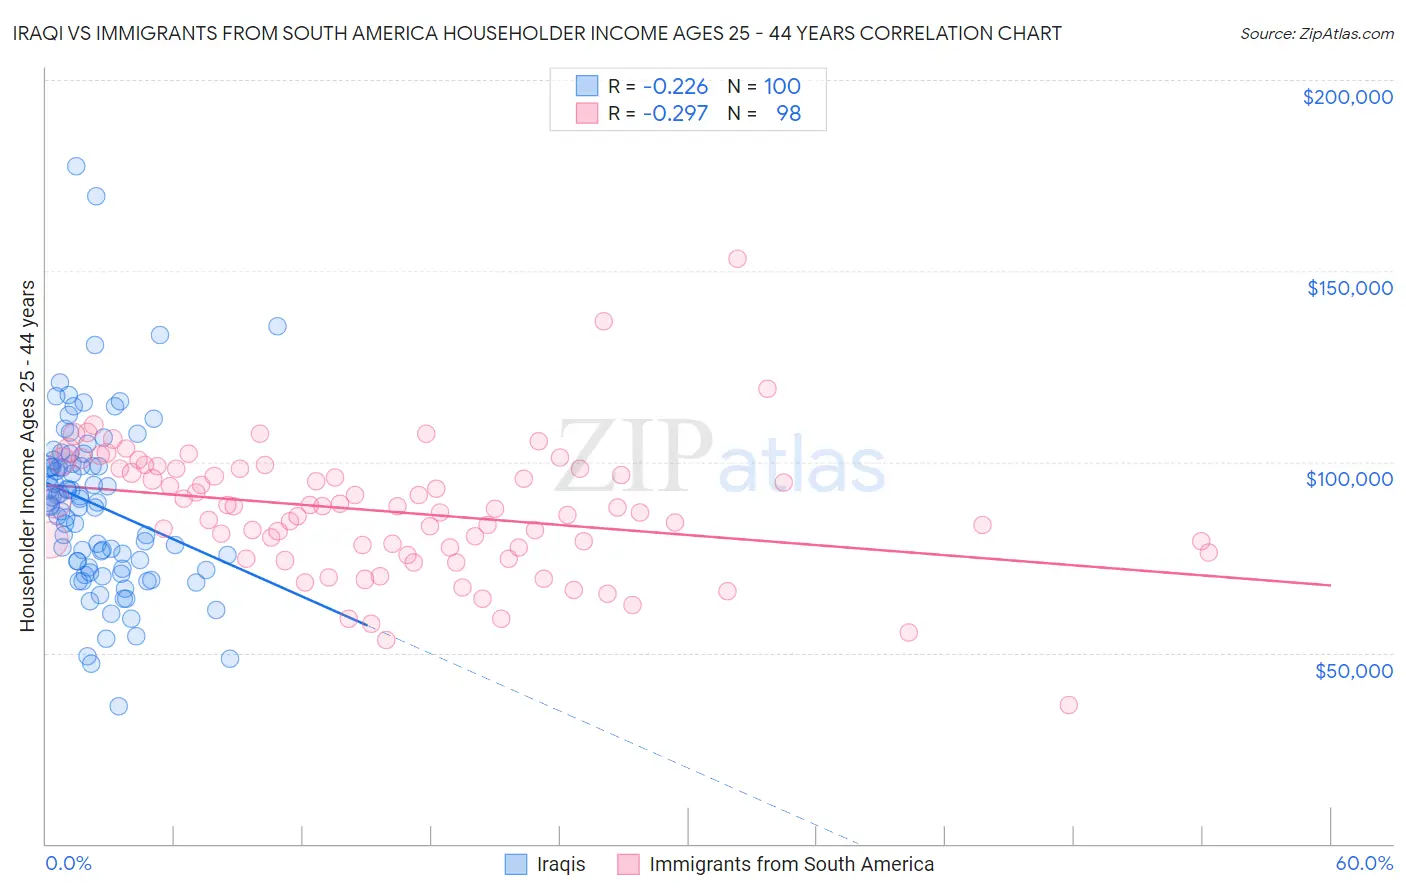 Iraqi vs Immigrants from South America Householder Income Ages 25 - 44 years